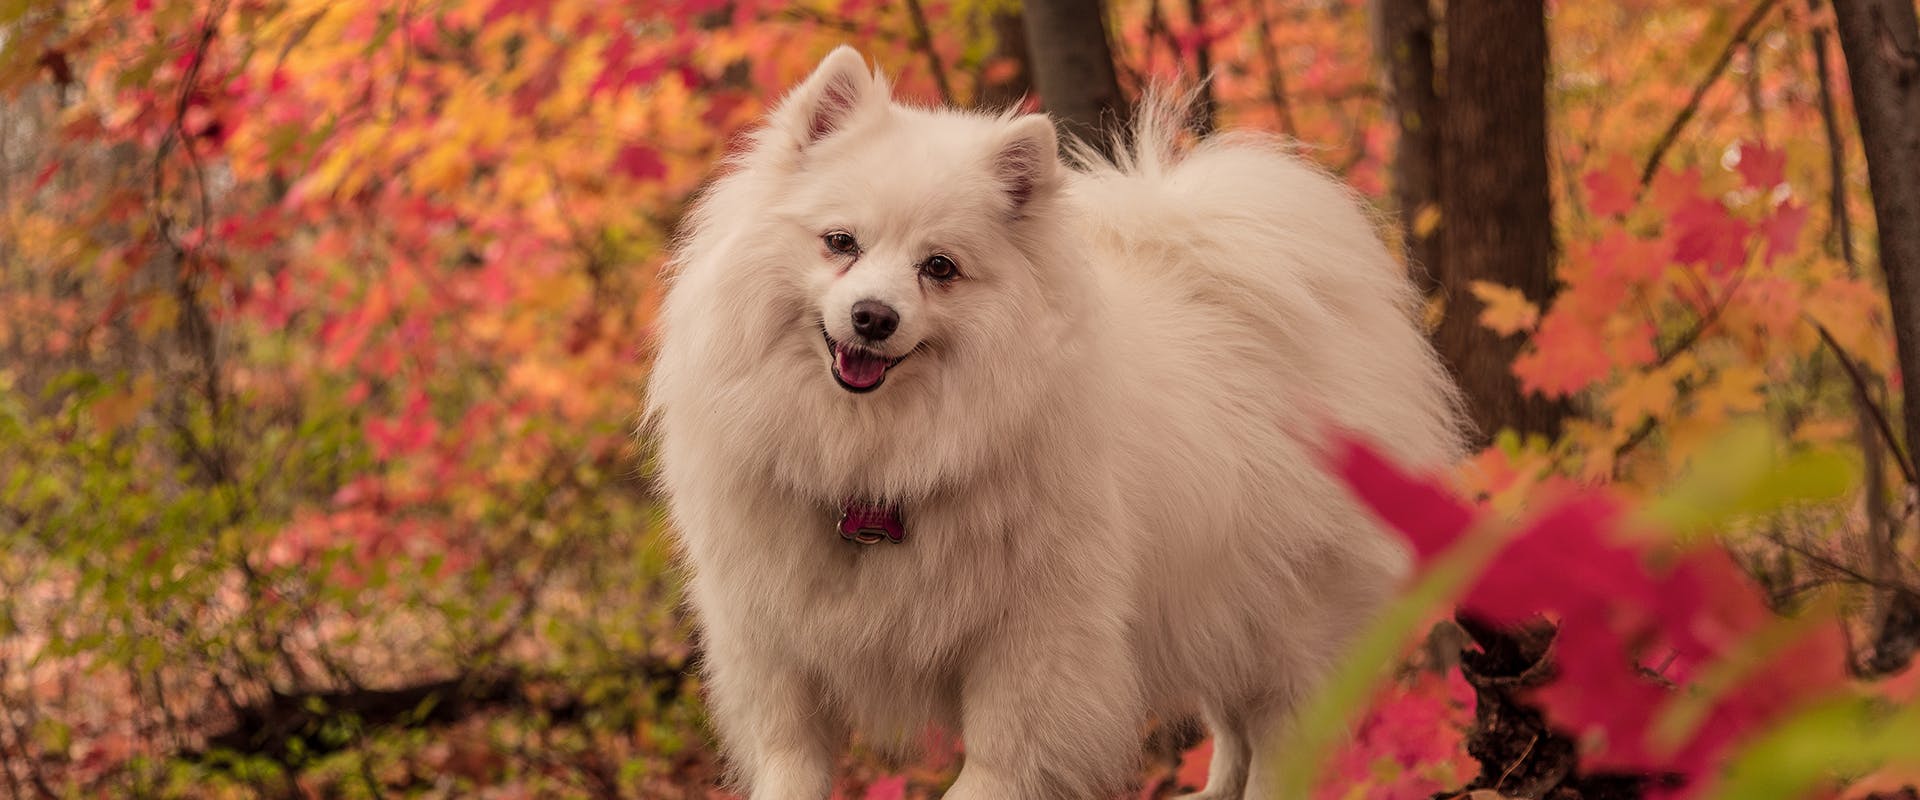 A fluffy dog that looks resembles a fox, standing in an autumn-y forest